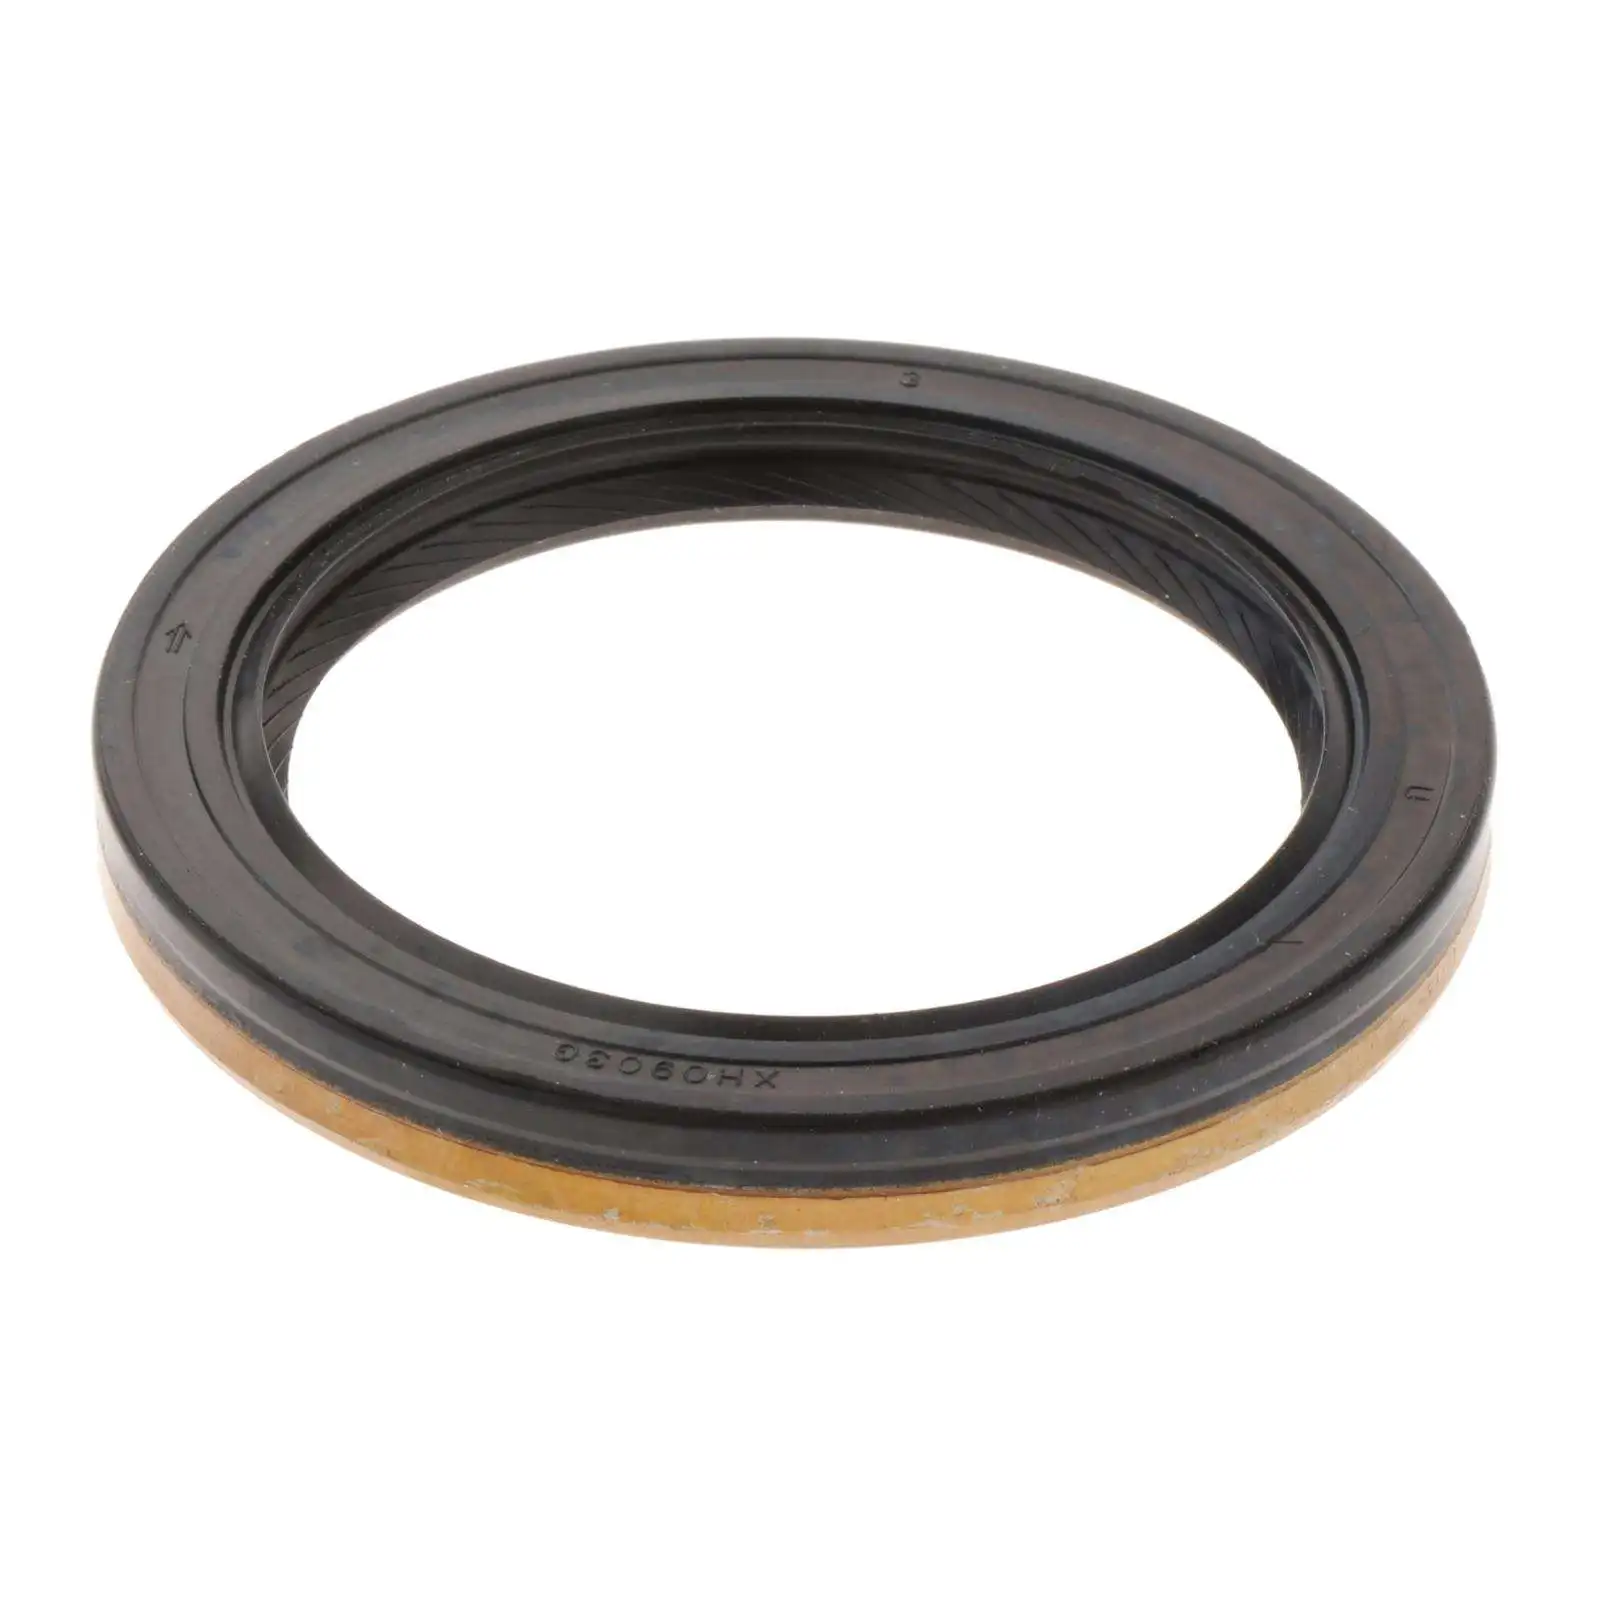 Front Oil Seal Replace Transmission Jf015E Jf017E Parts Accessories Fit for Nissan Sunshine